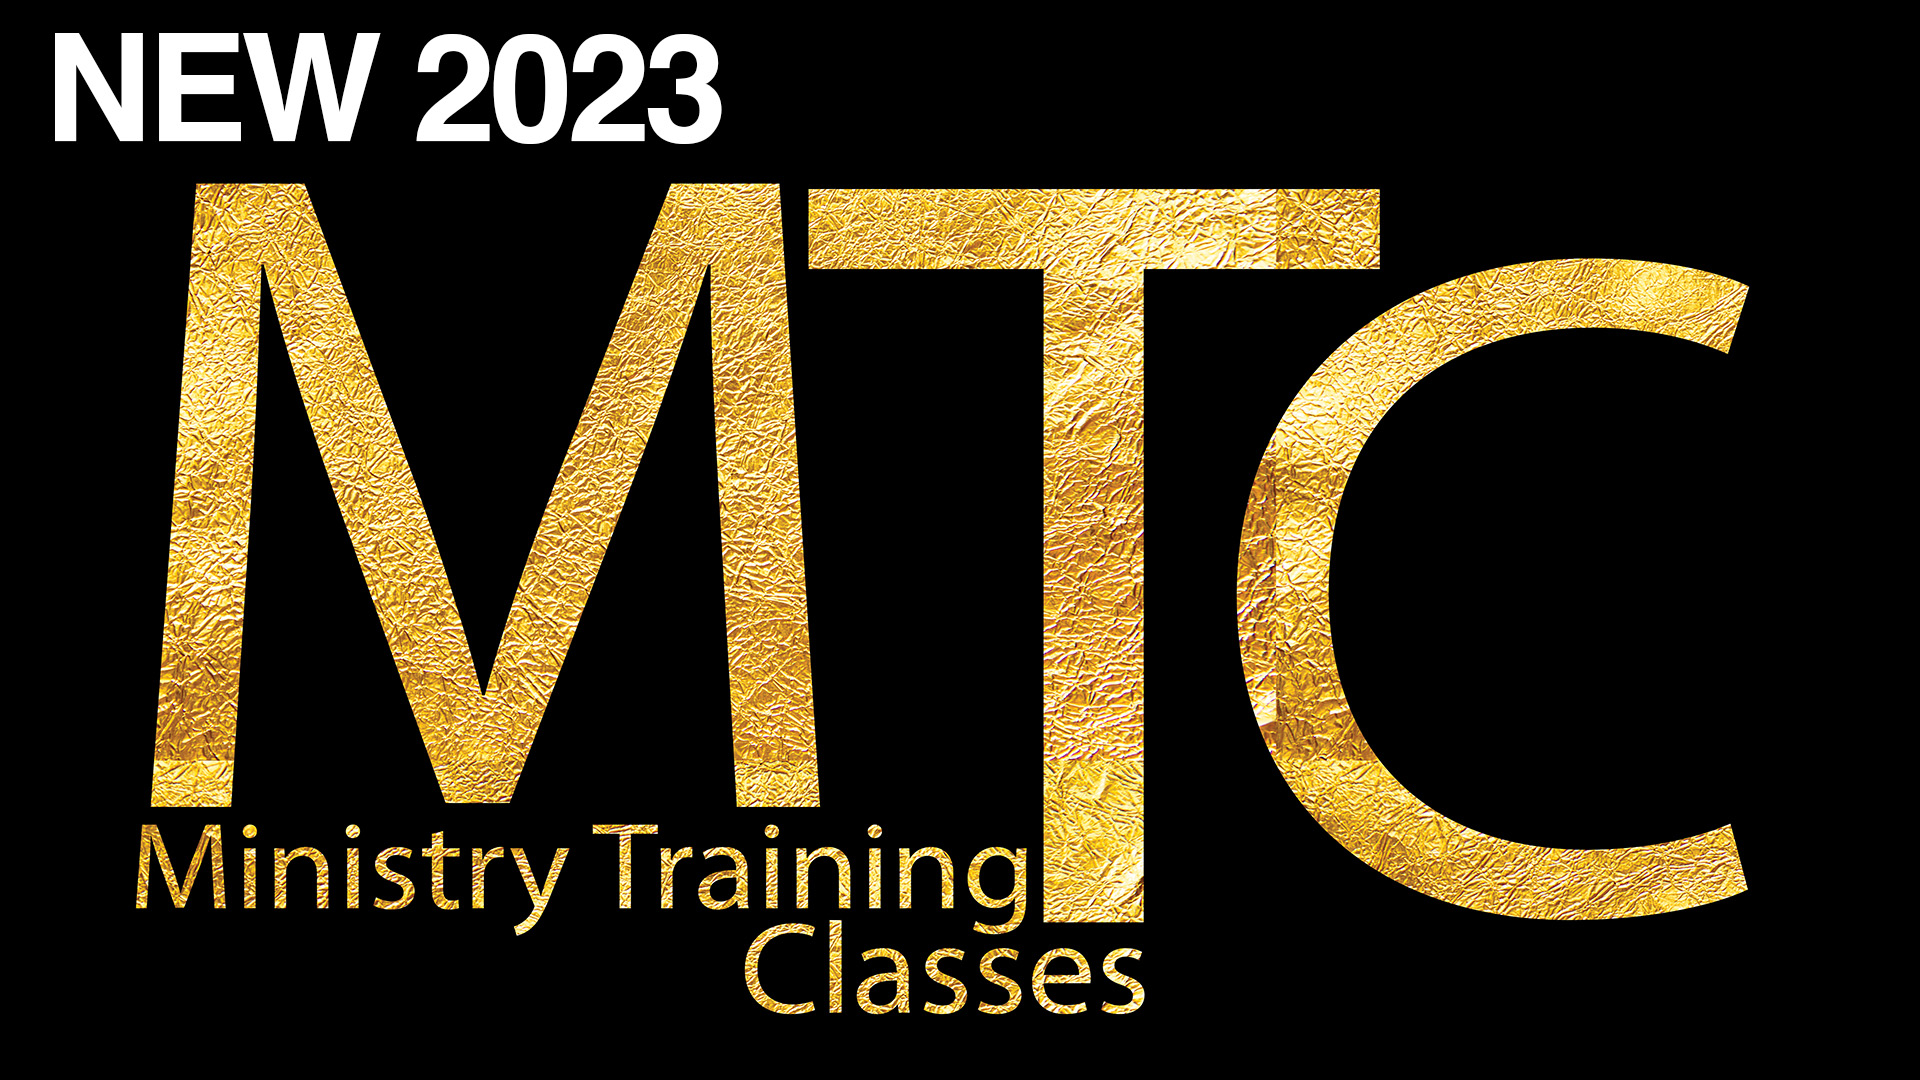 New 2023 Ministry Training Classes